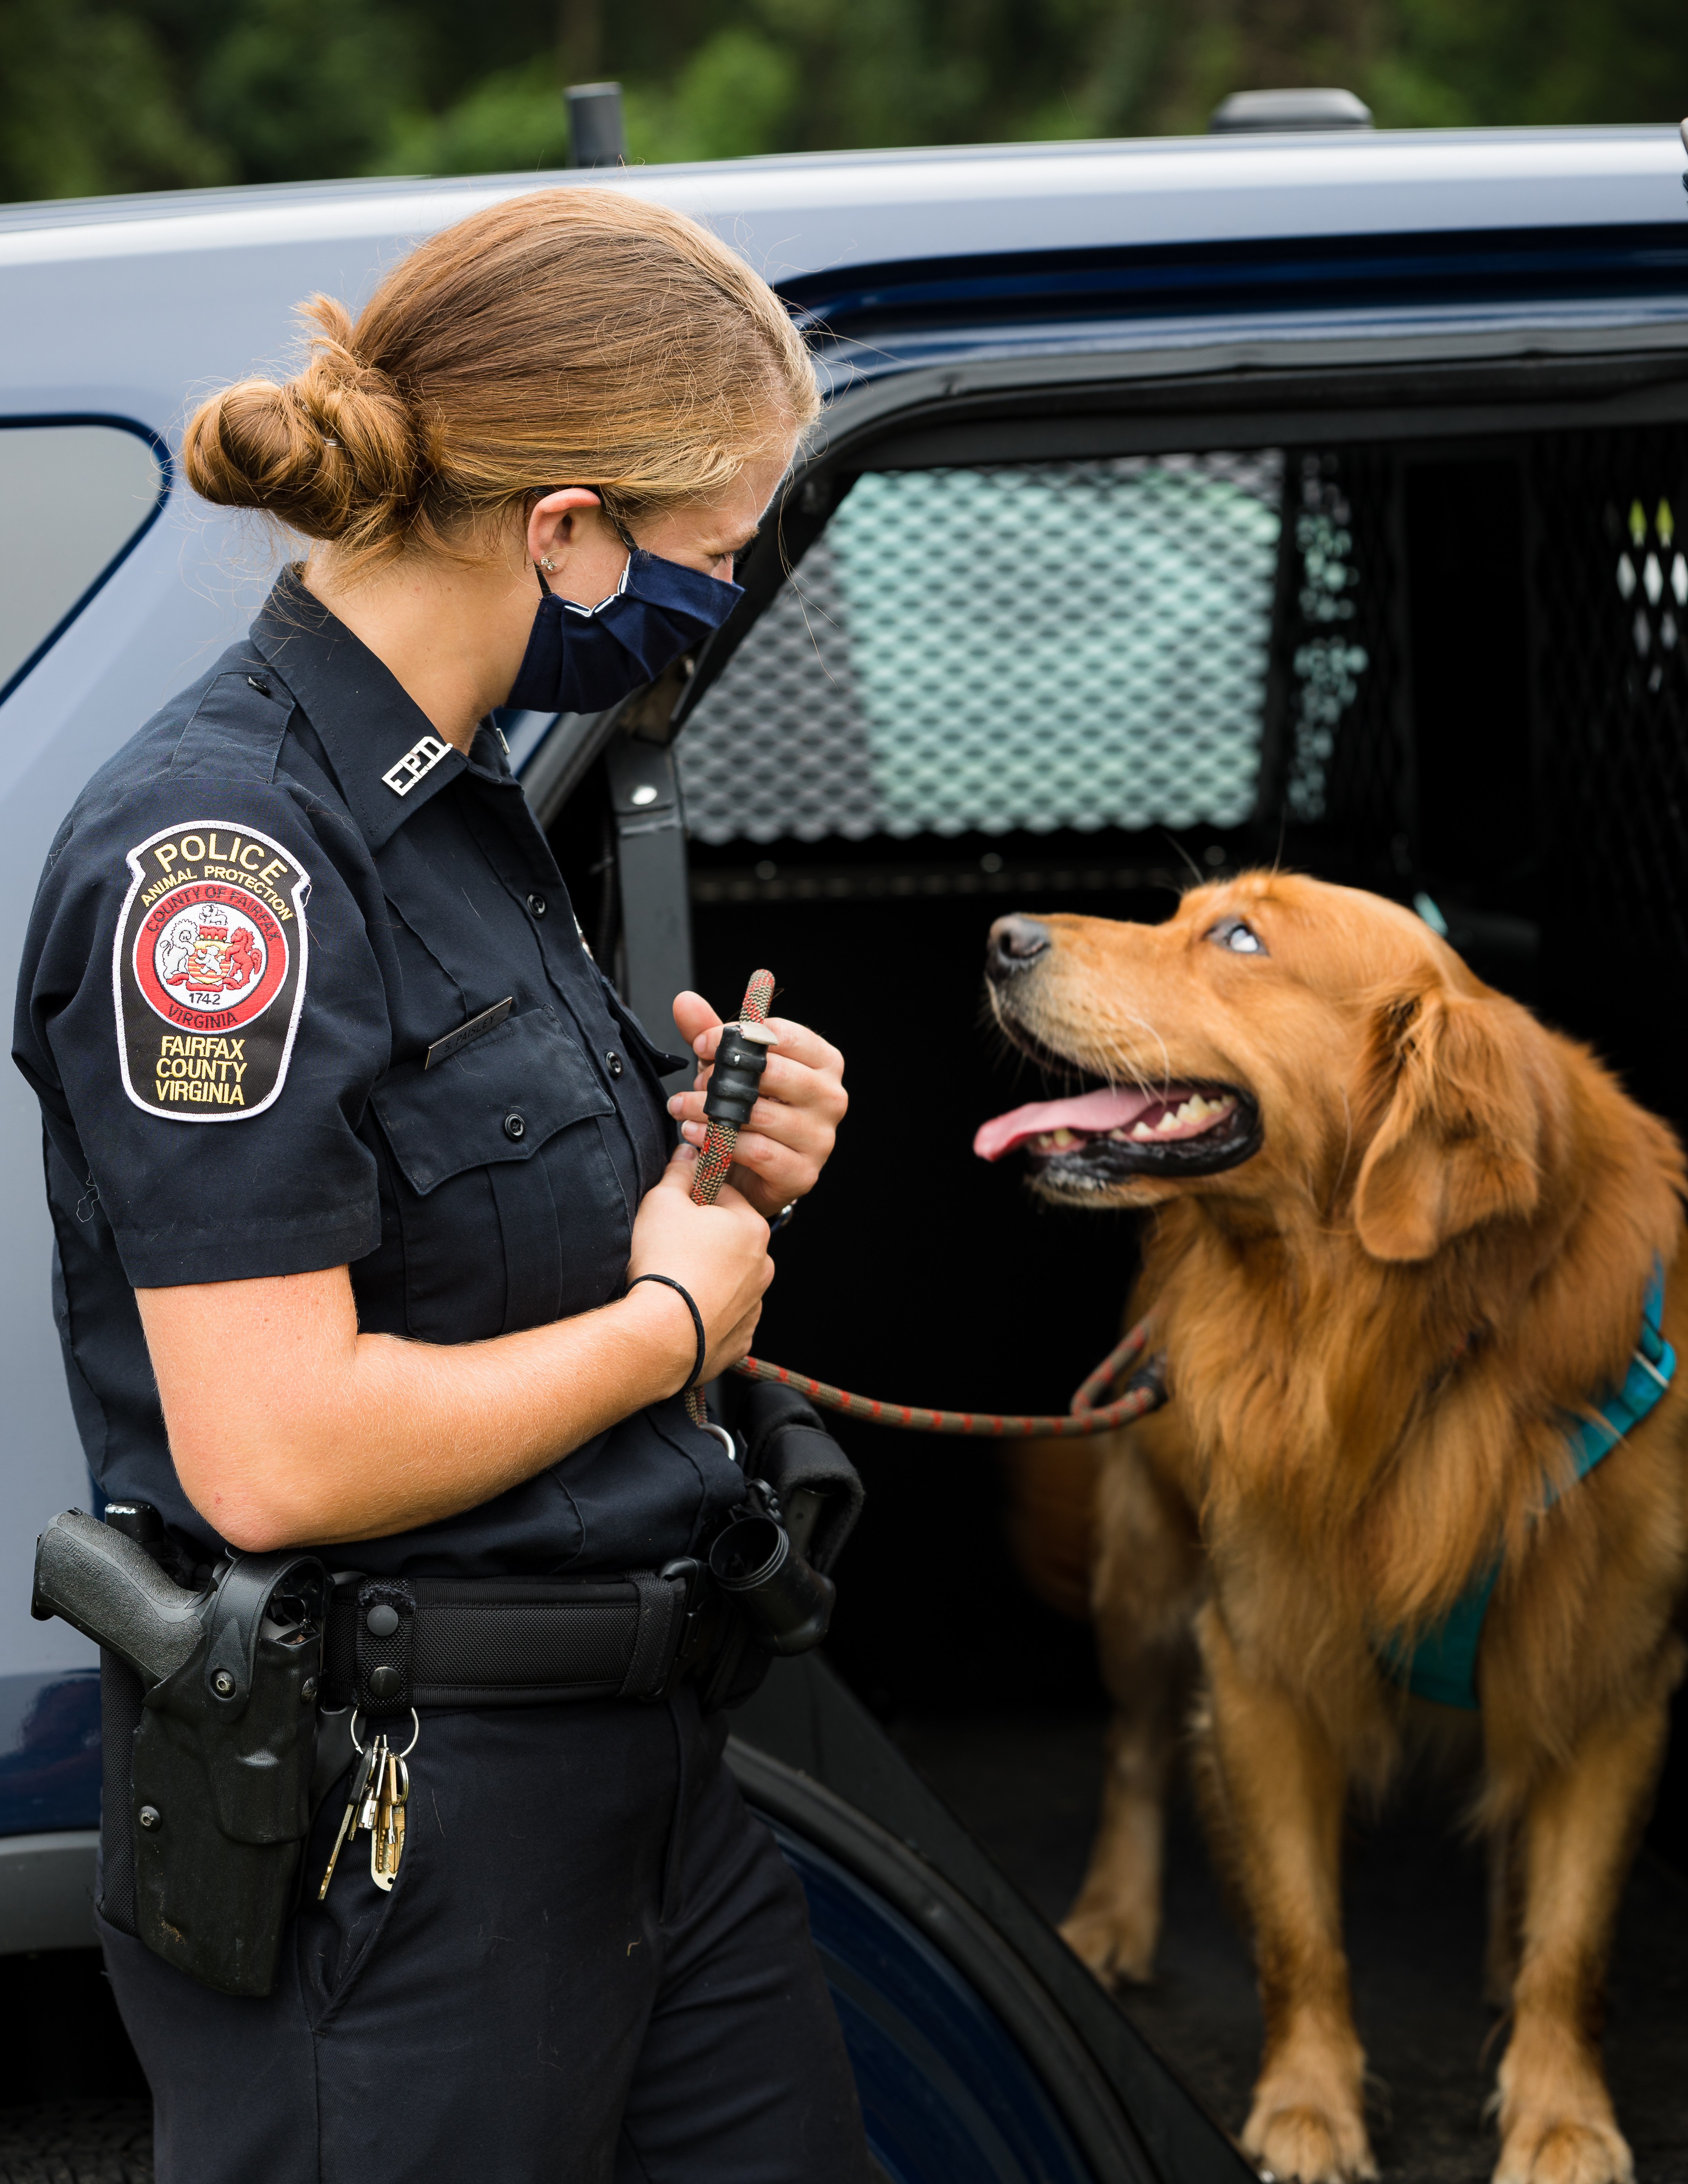 female animal protection officer poses with dog